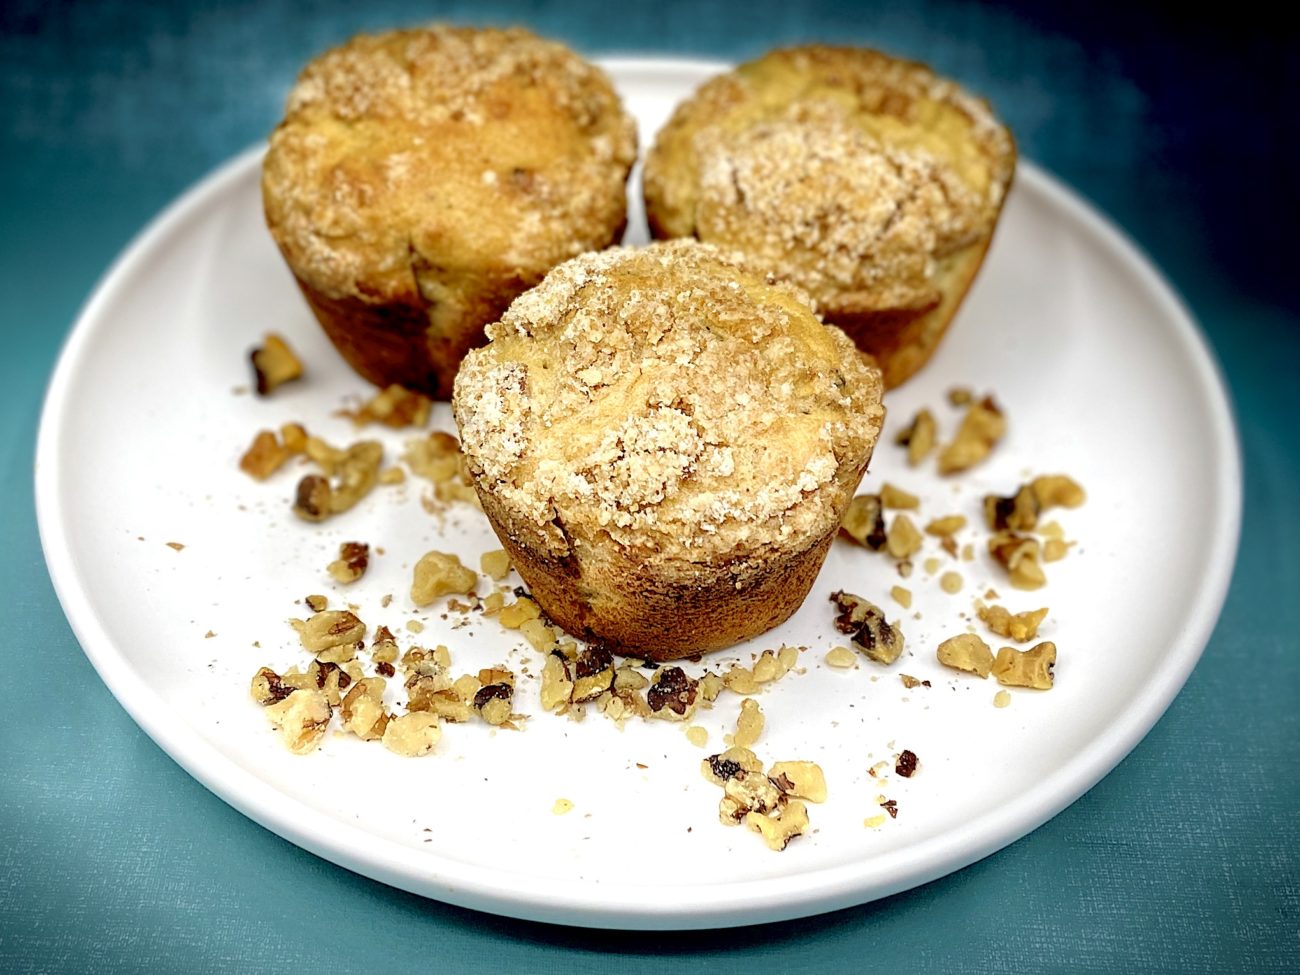 Banana Walnut Buttermilk Muffins with Crunchy Streusel Topping